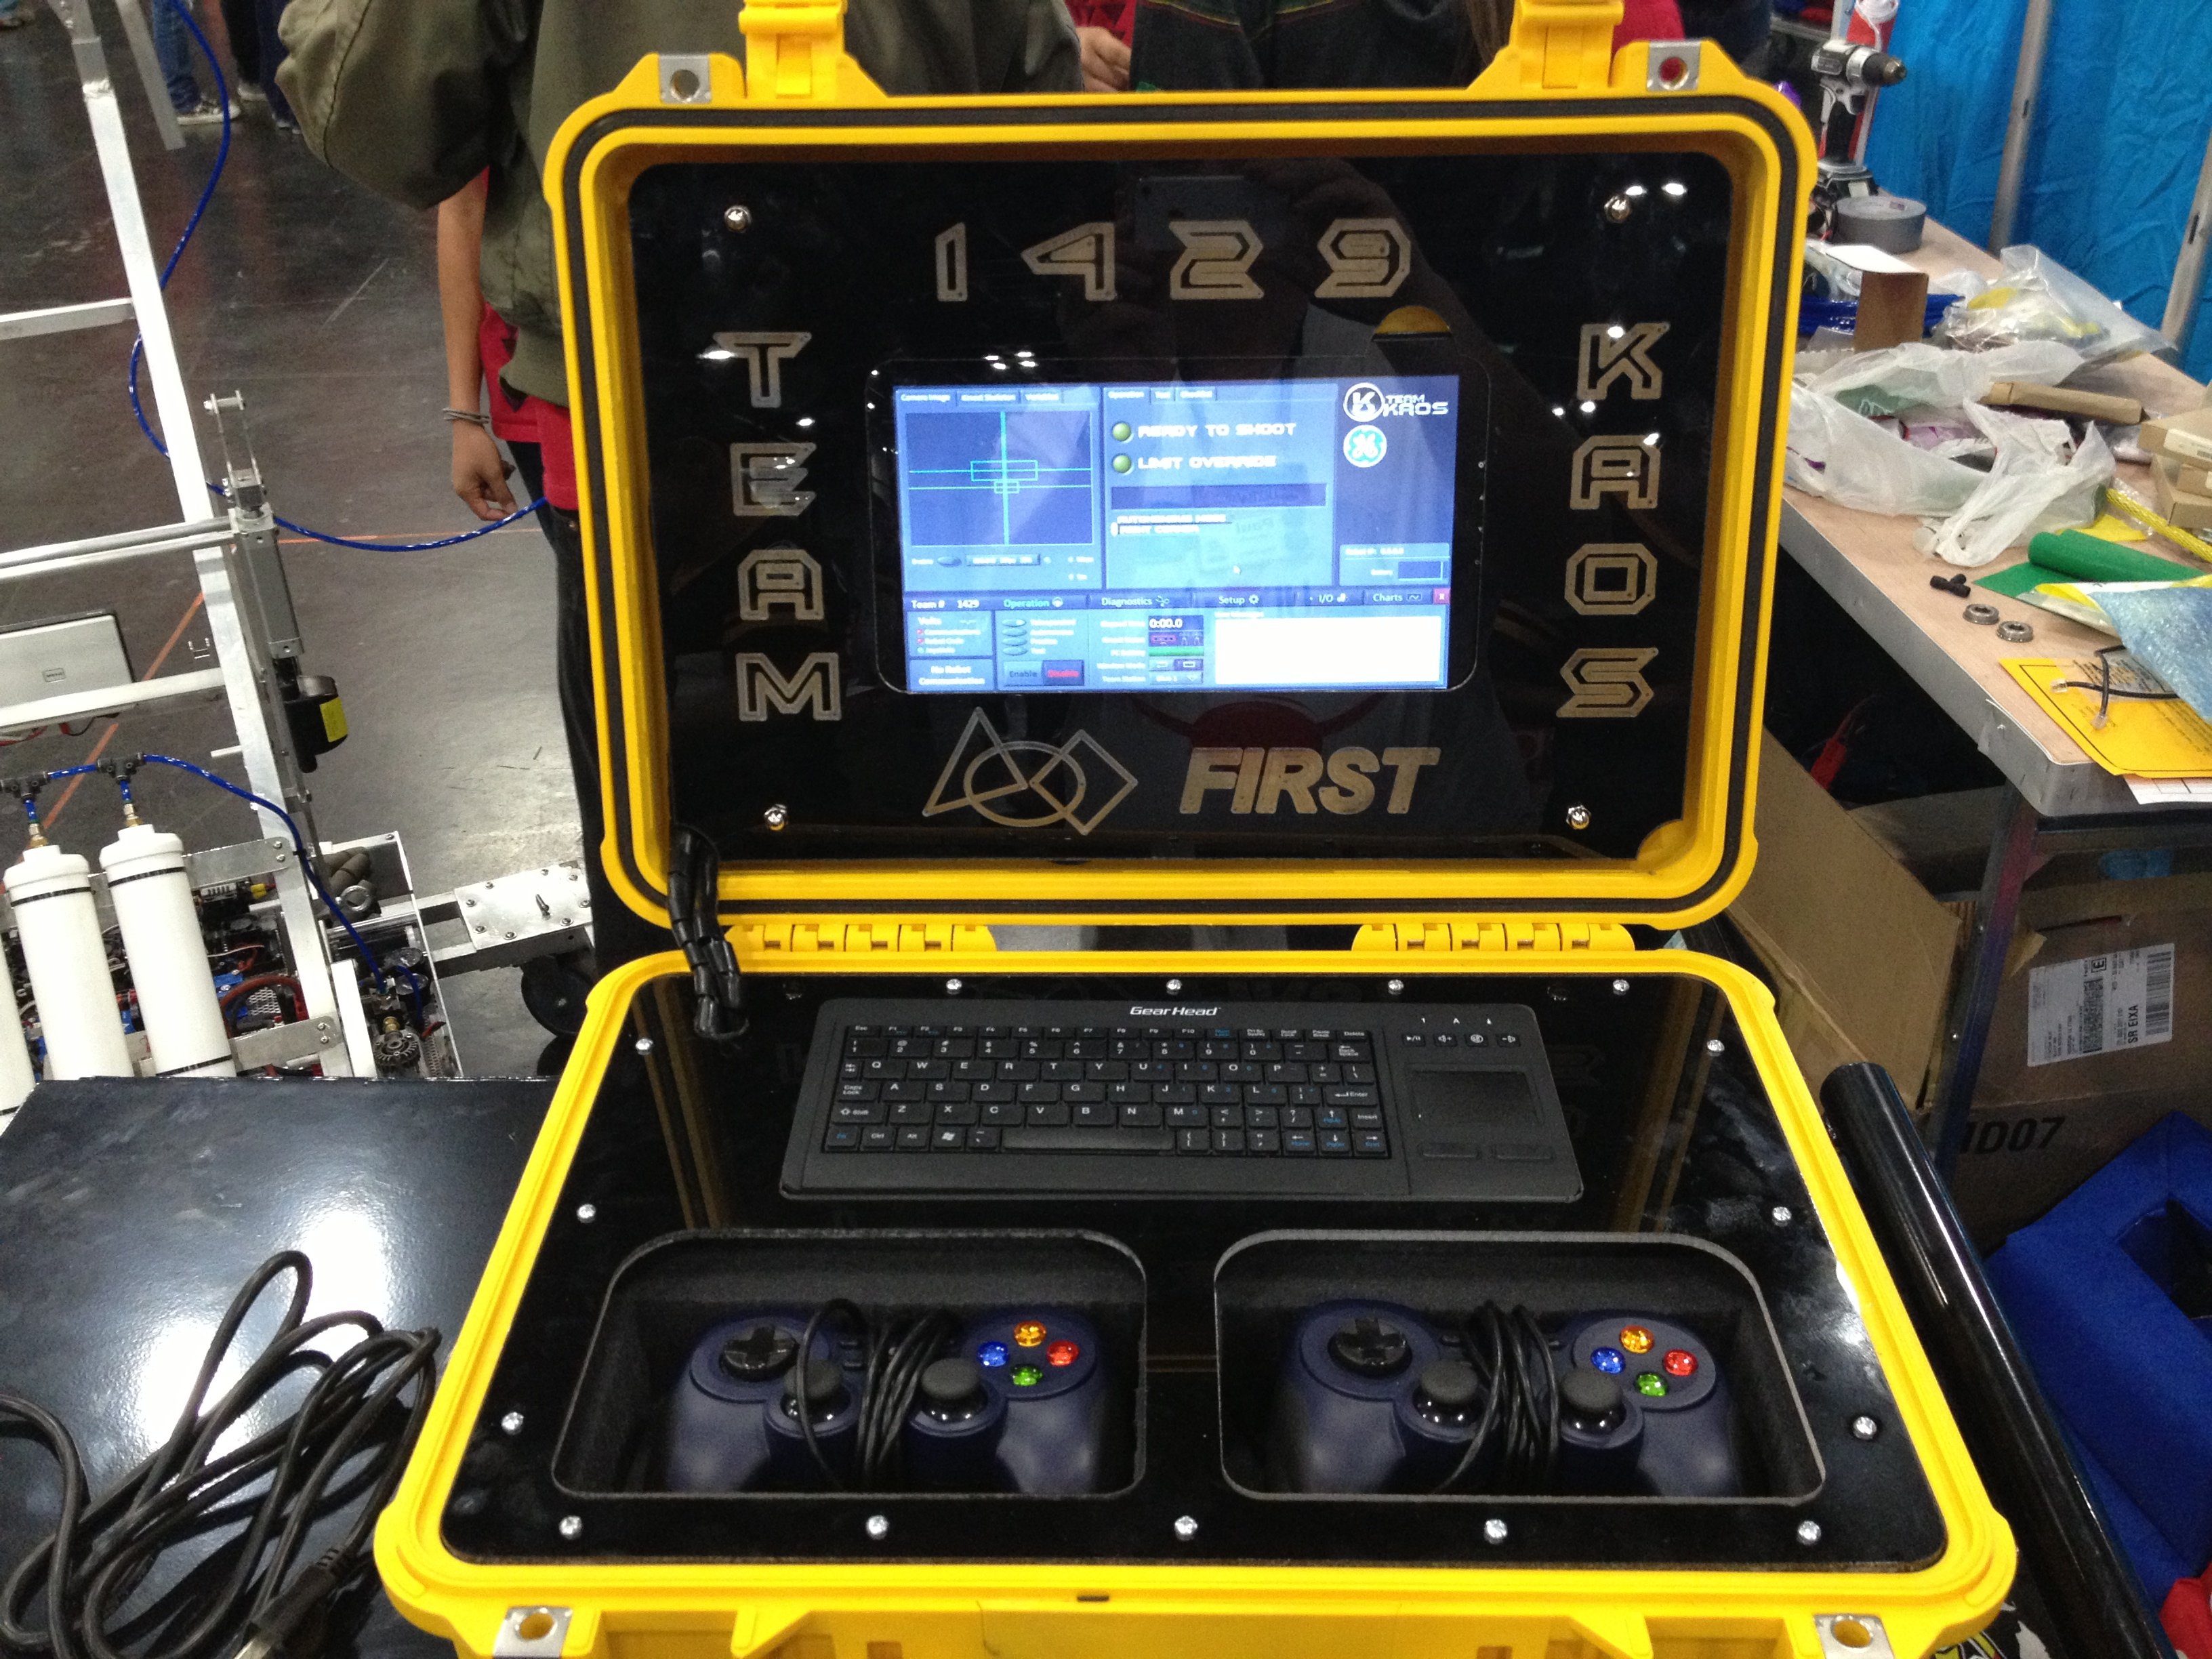 where can i download the frc driver station